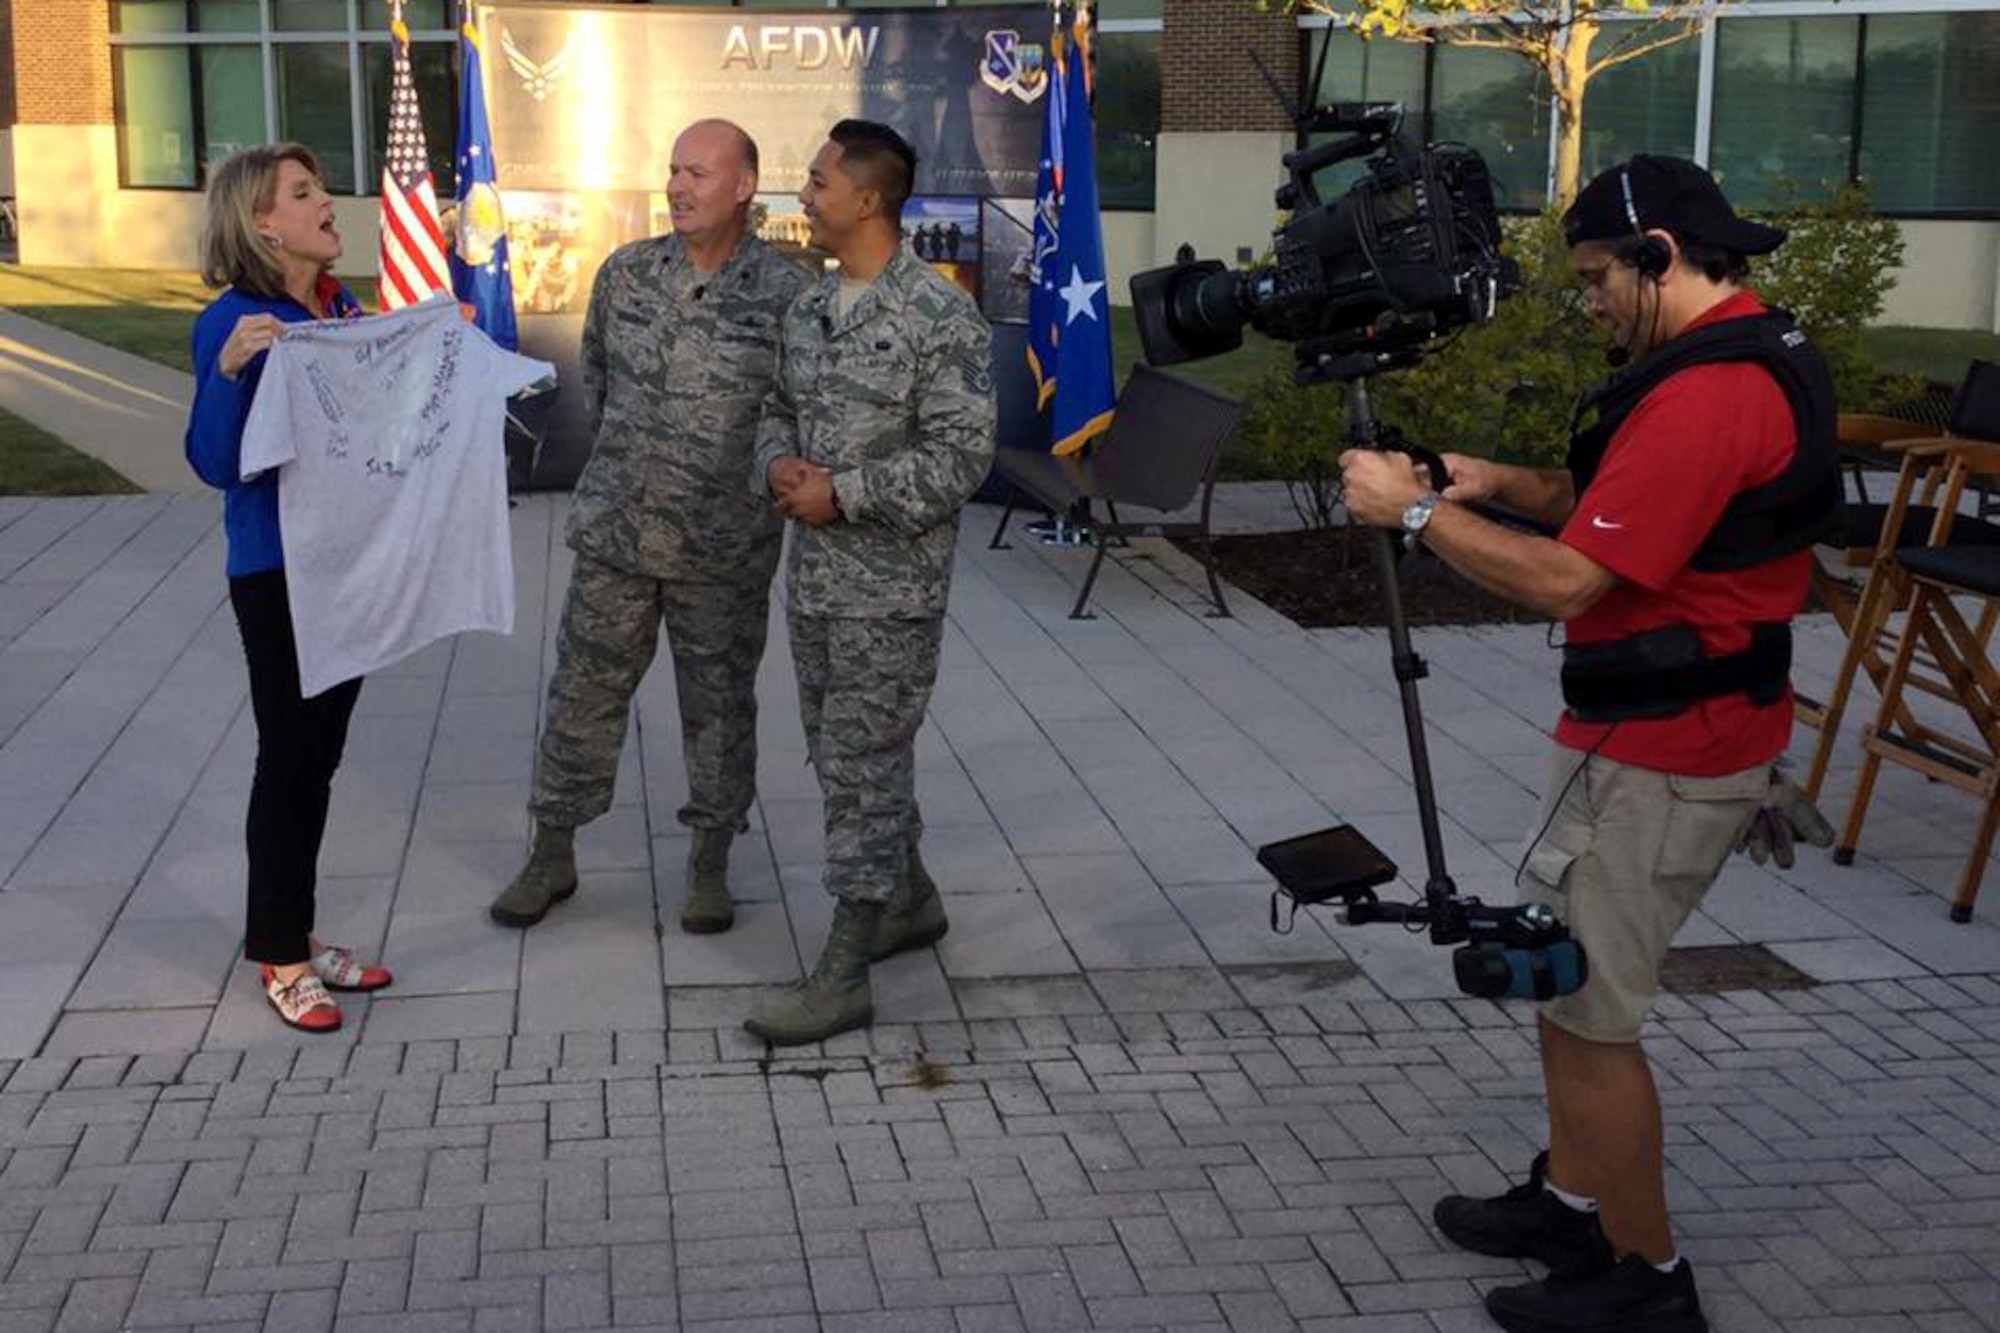 Fox 5 DC Anchor Holly Morris speaks with Lt. Col. Jon Goodman, 744th Communications Squadron commander, and Staff Sgt. Mario Marquez, 744th CS physical training leader, at Joint Base Andrews on Sep. 23, 2016. AFDW hosted Fox5 DC for a live broadcast of FOX 5 News Morning and Good Day DC live from JBA in celebration of the Air Force’s 69th Birthday. (U.S. Air Force photo/Tech. Sgt. Matt Davis)